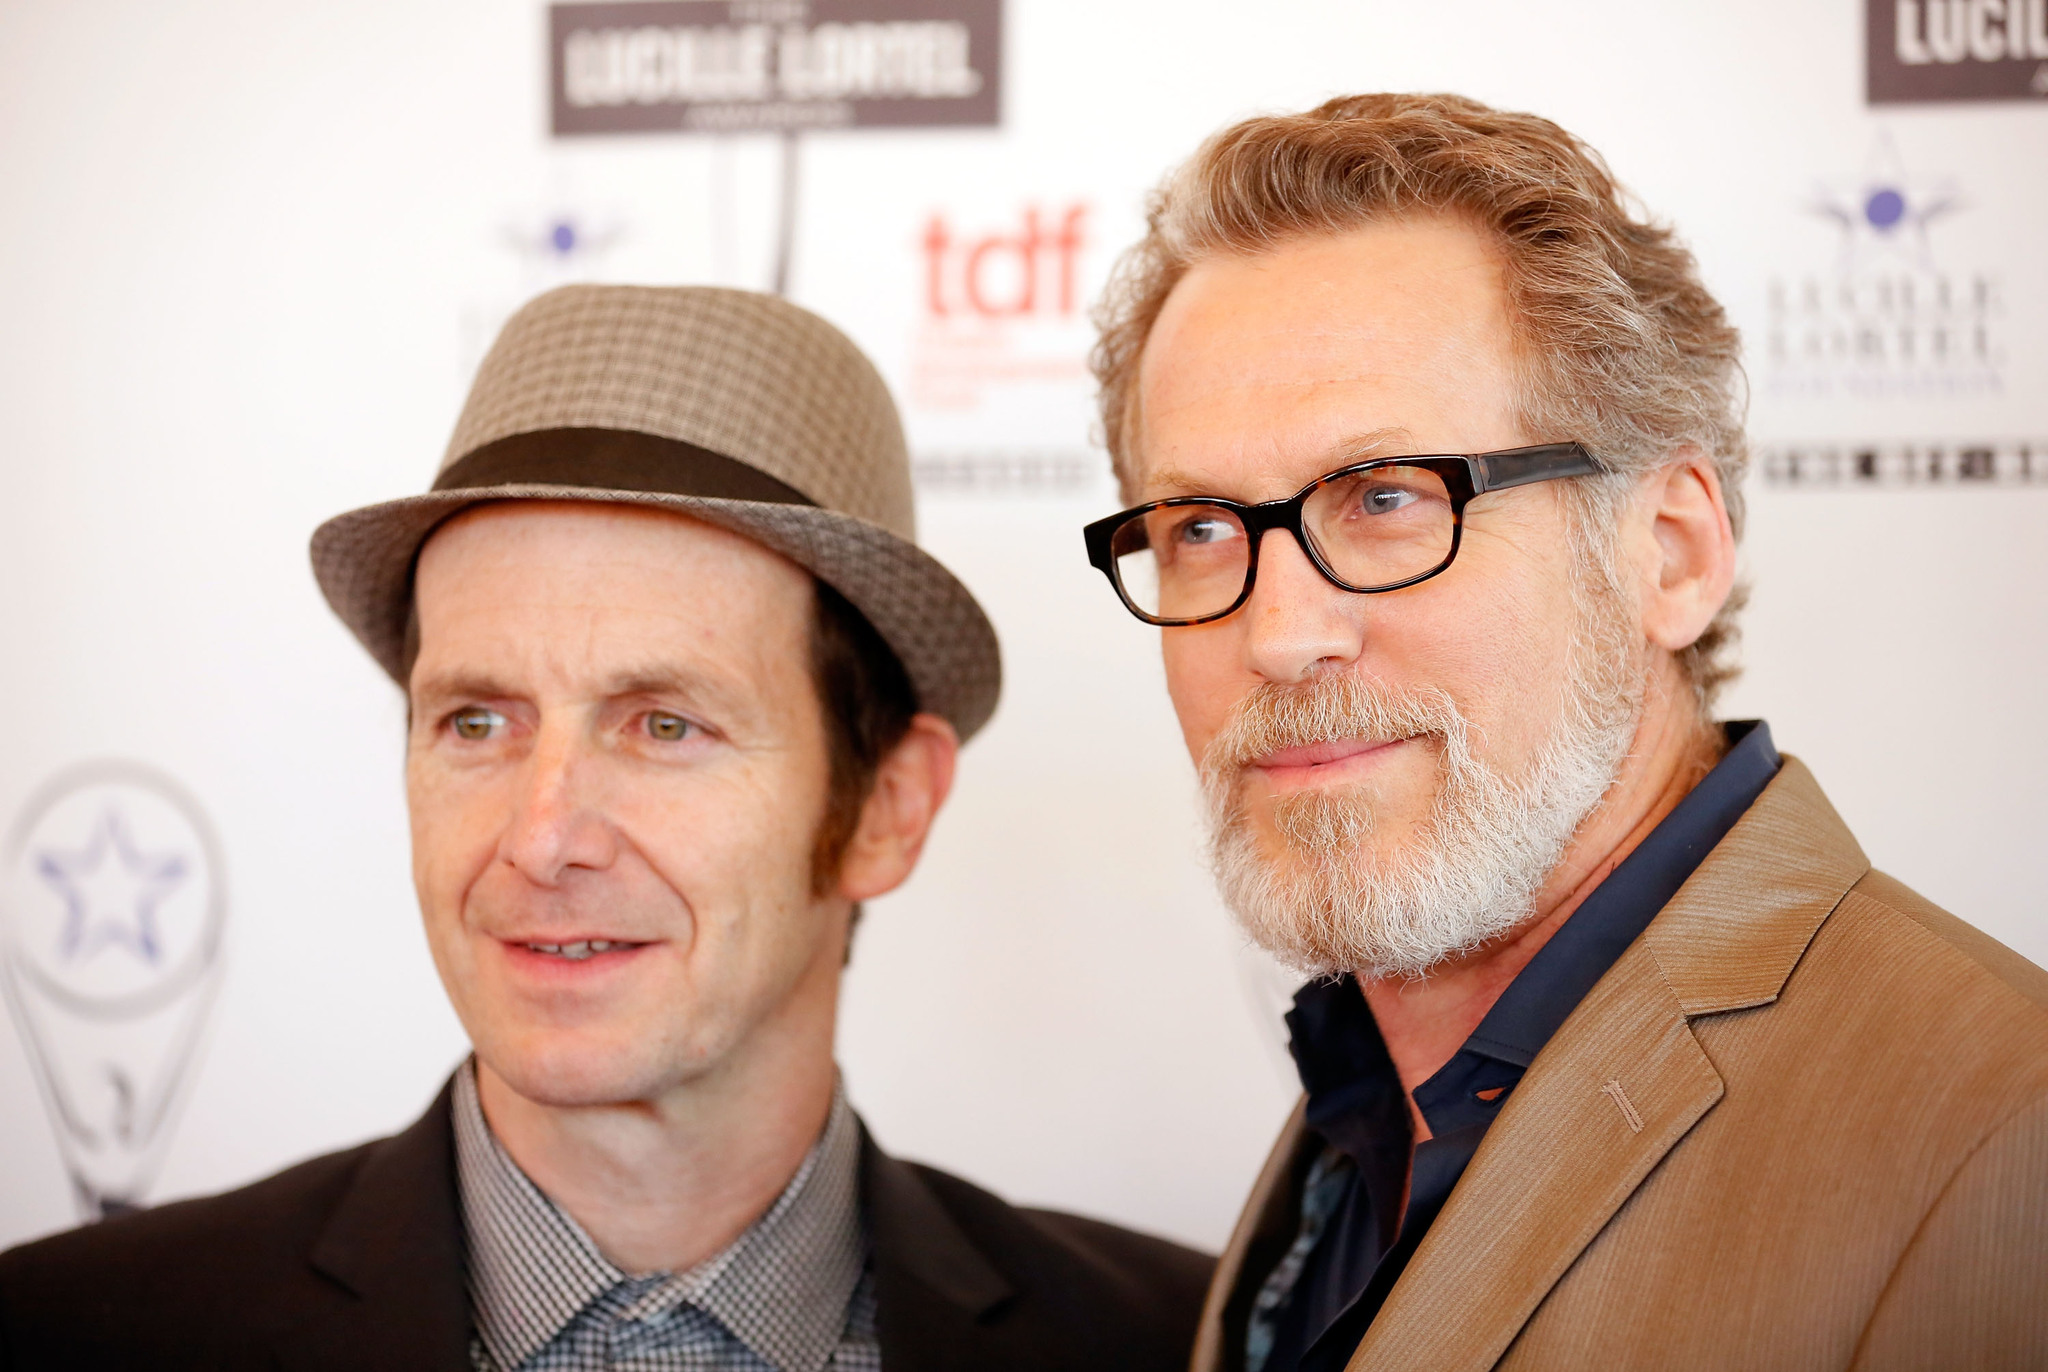 Denis O'Hare and Stephen Spinella